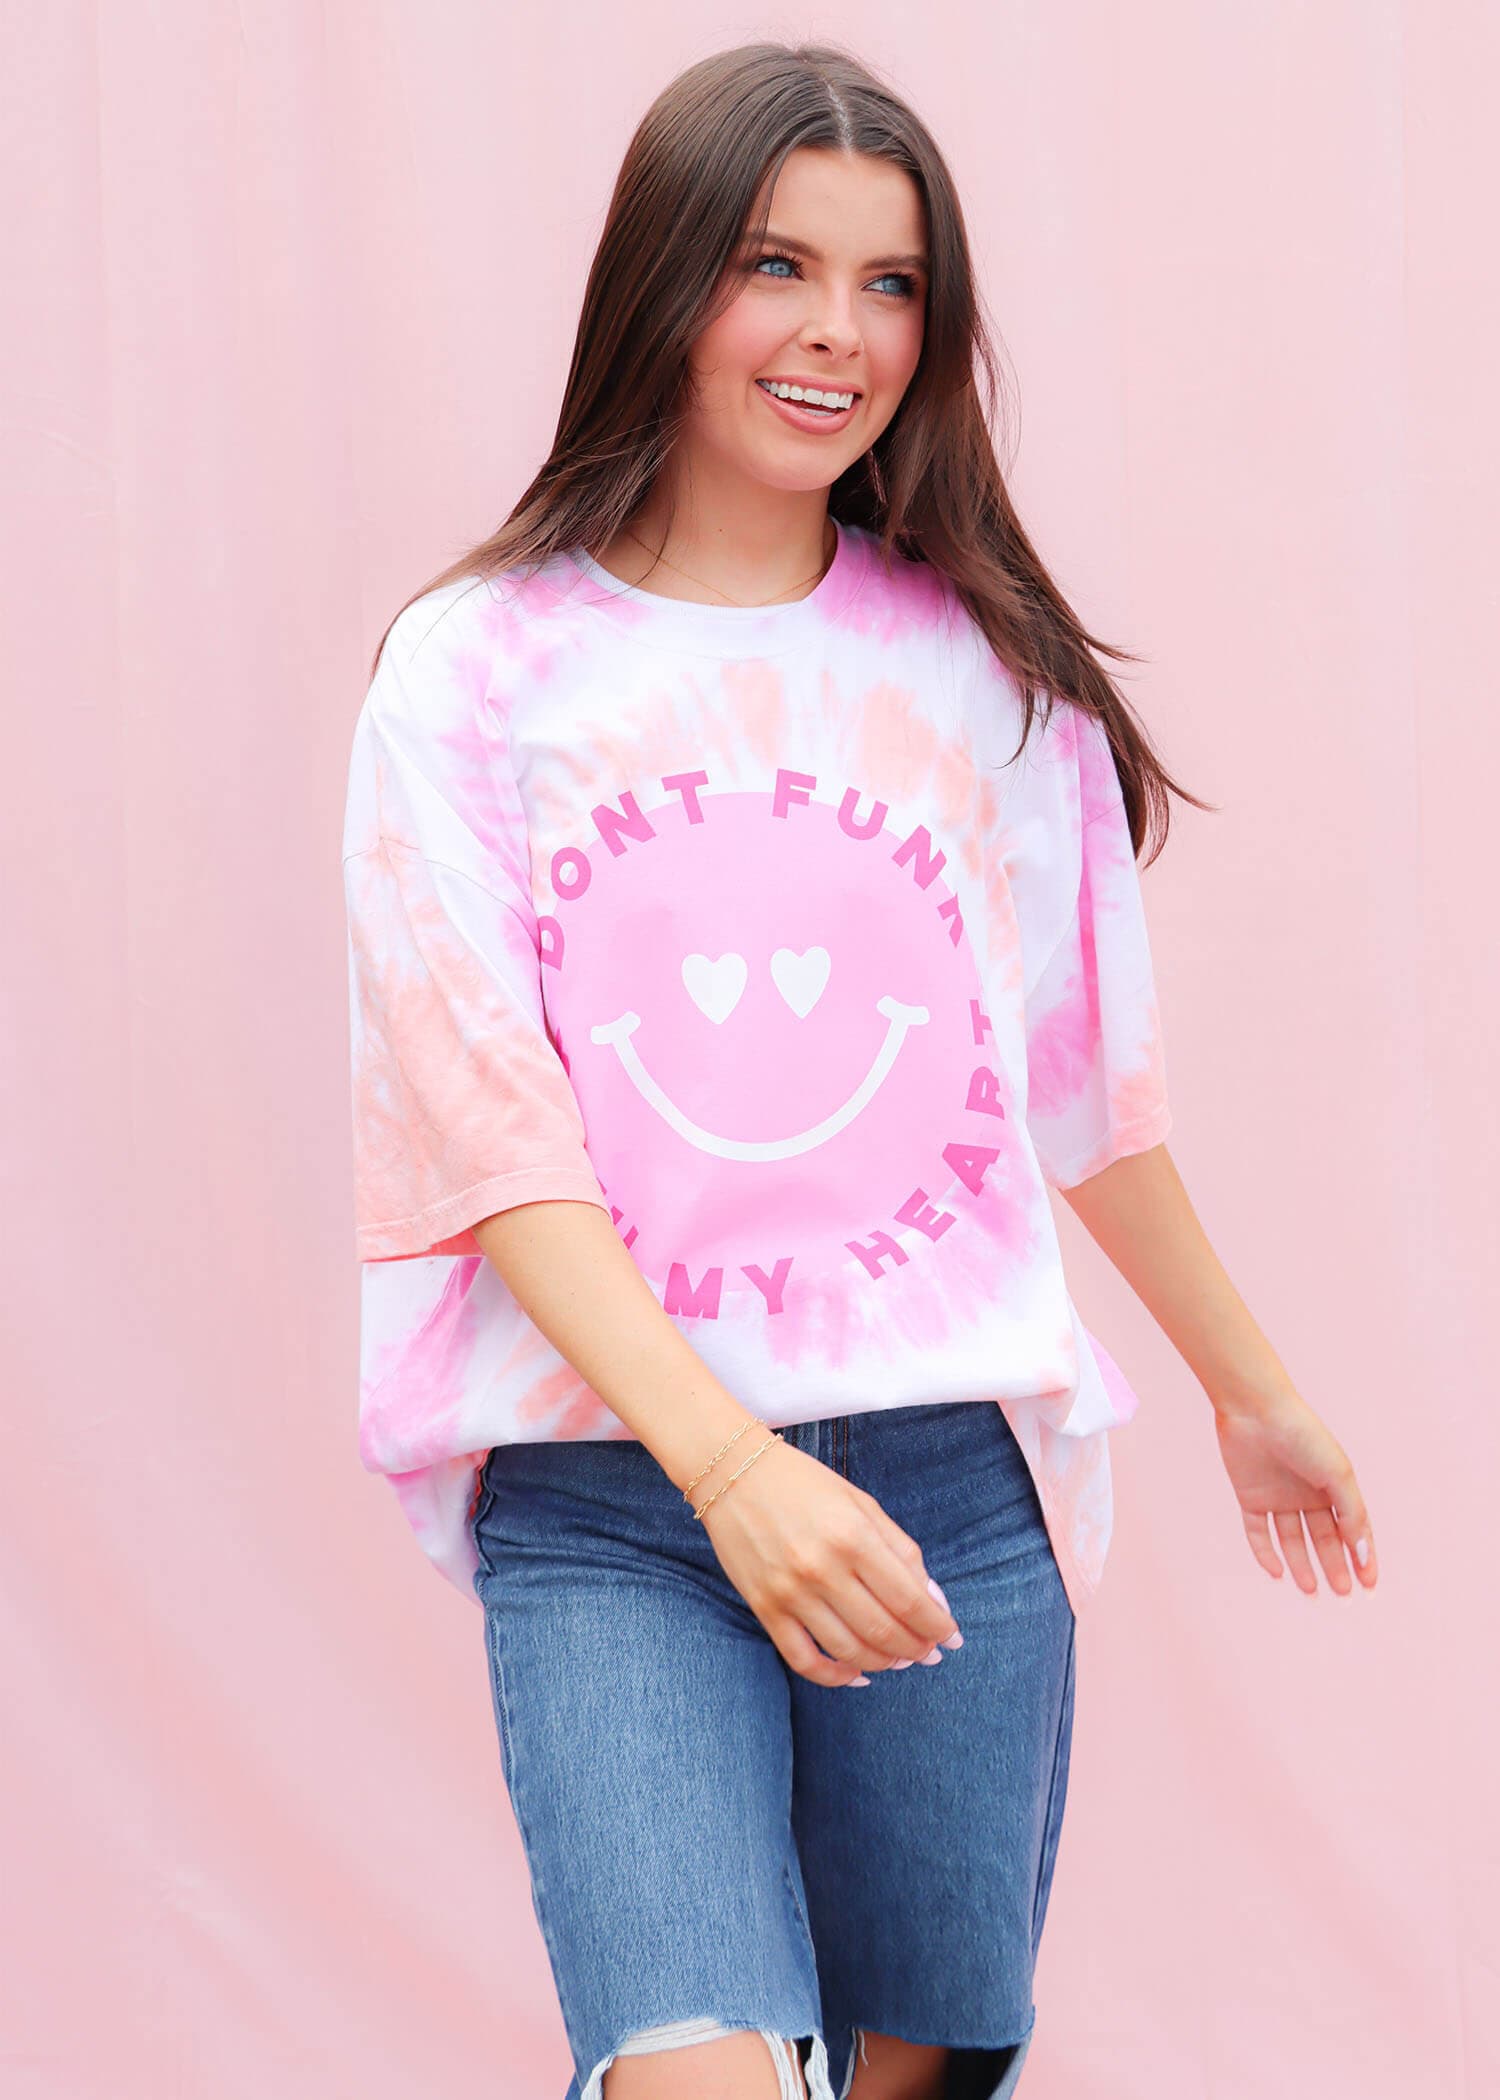 Don't Funk With My Heart T-Shirt - Multi Tops MerciGrace Boutique.